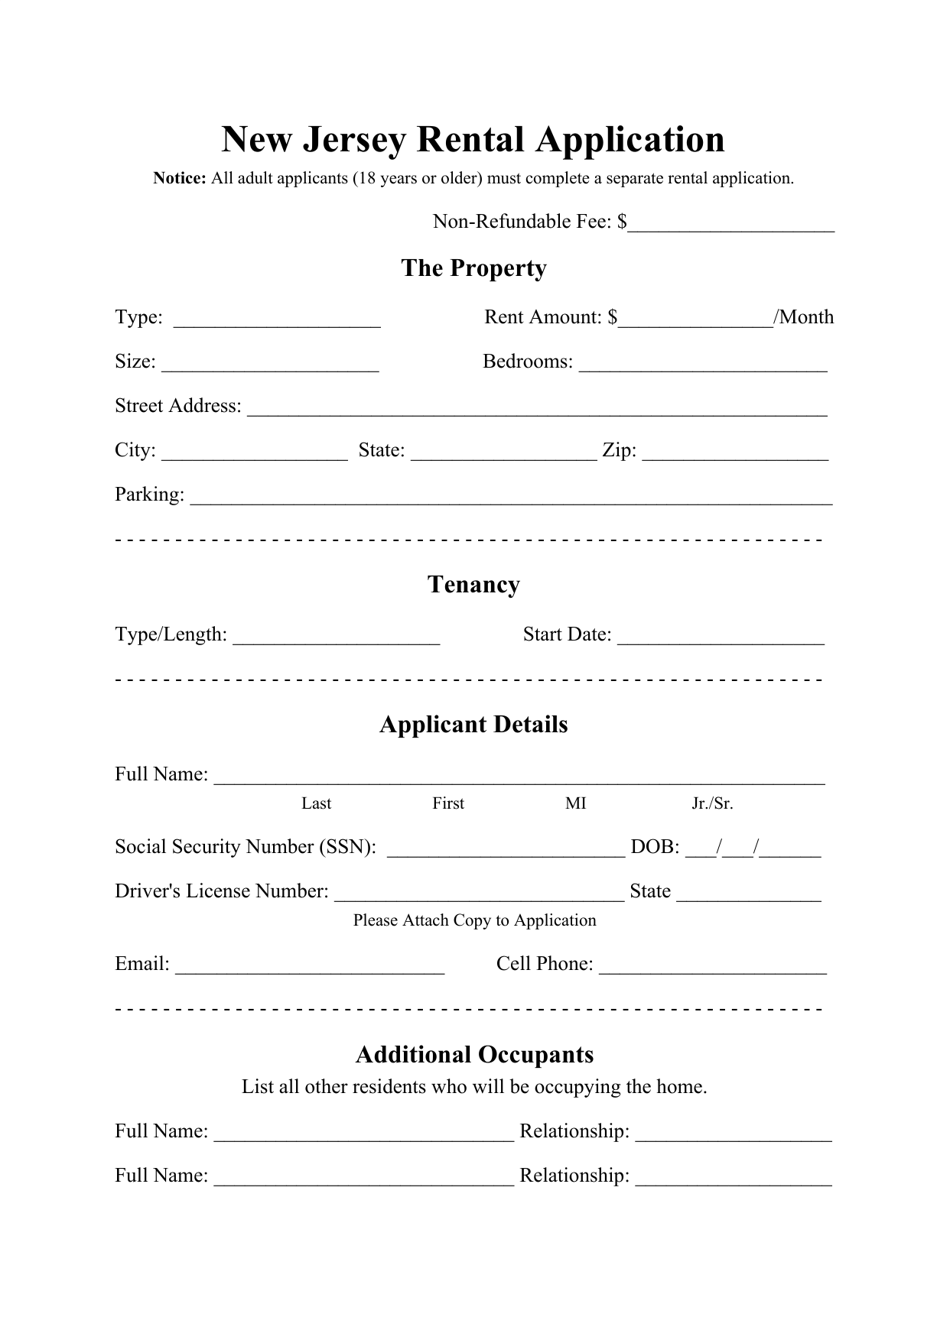 new-jersey-rental-application-form-fill-out-sign-online-and-download